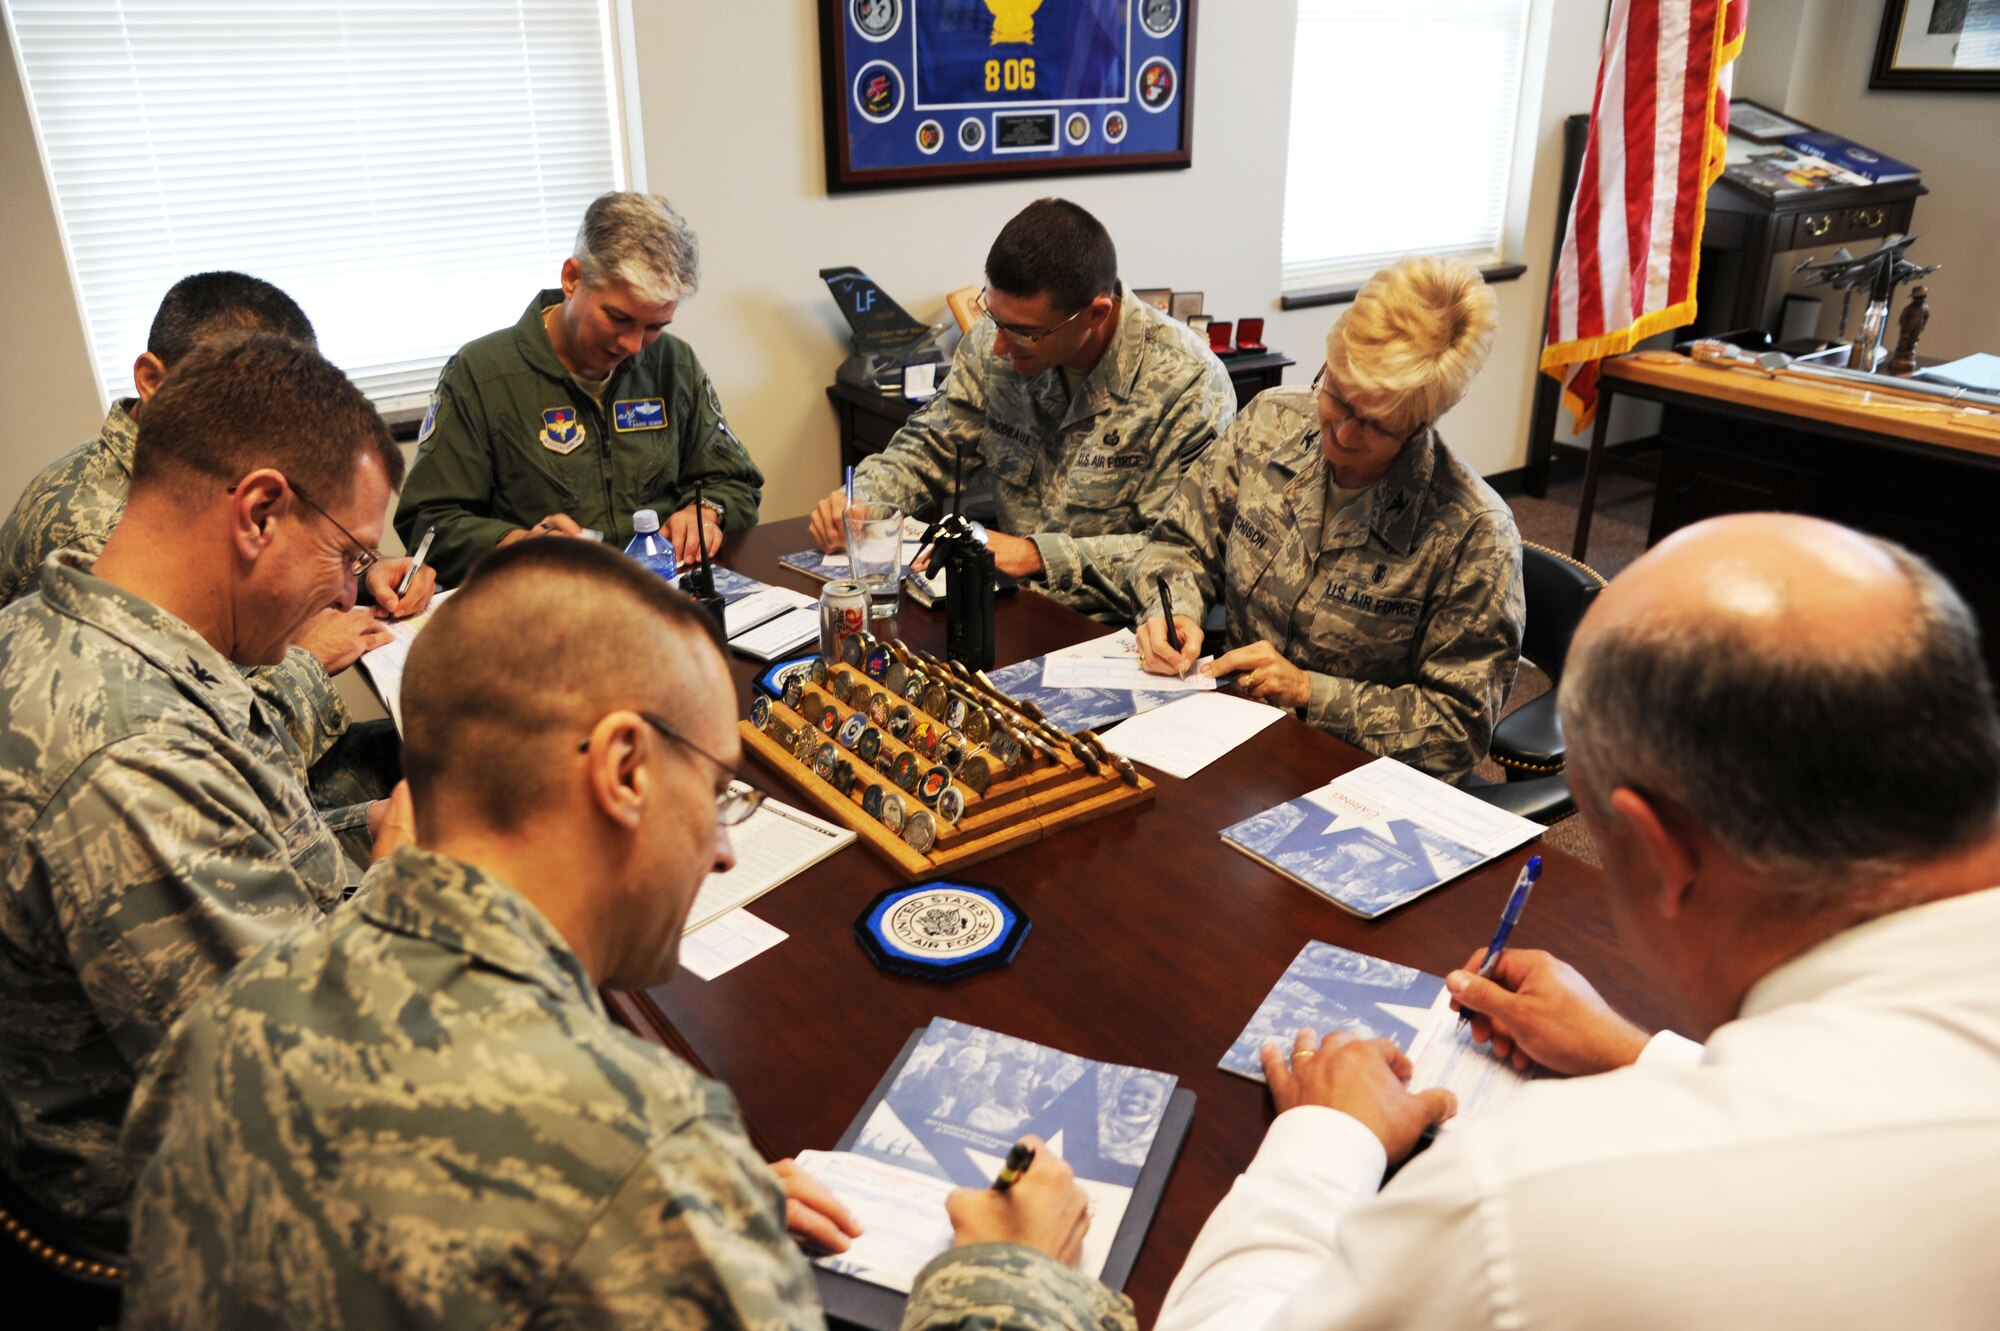 The BLAZE Leadership Team fill in their Combined Federal Campaign forms on Oct. 12 inside the wing commander’s office. The Fiscal Year 2011 CFC spans from Oct. 11 to Nov. 22. (U.S. Air Force photo/Airman 1st Class Chase Hedrick)